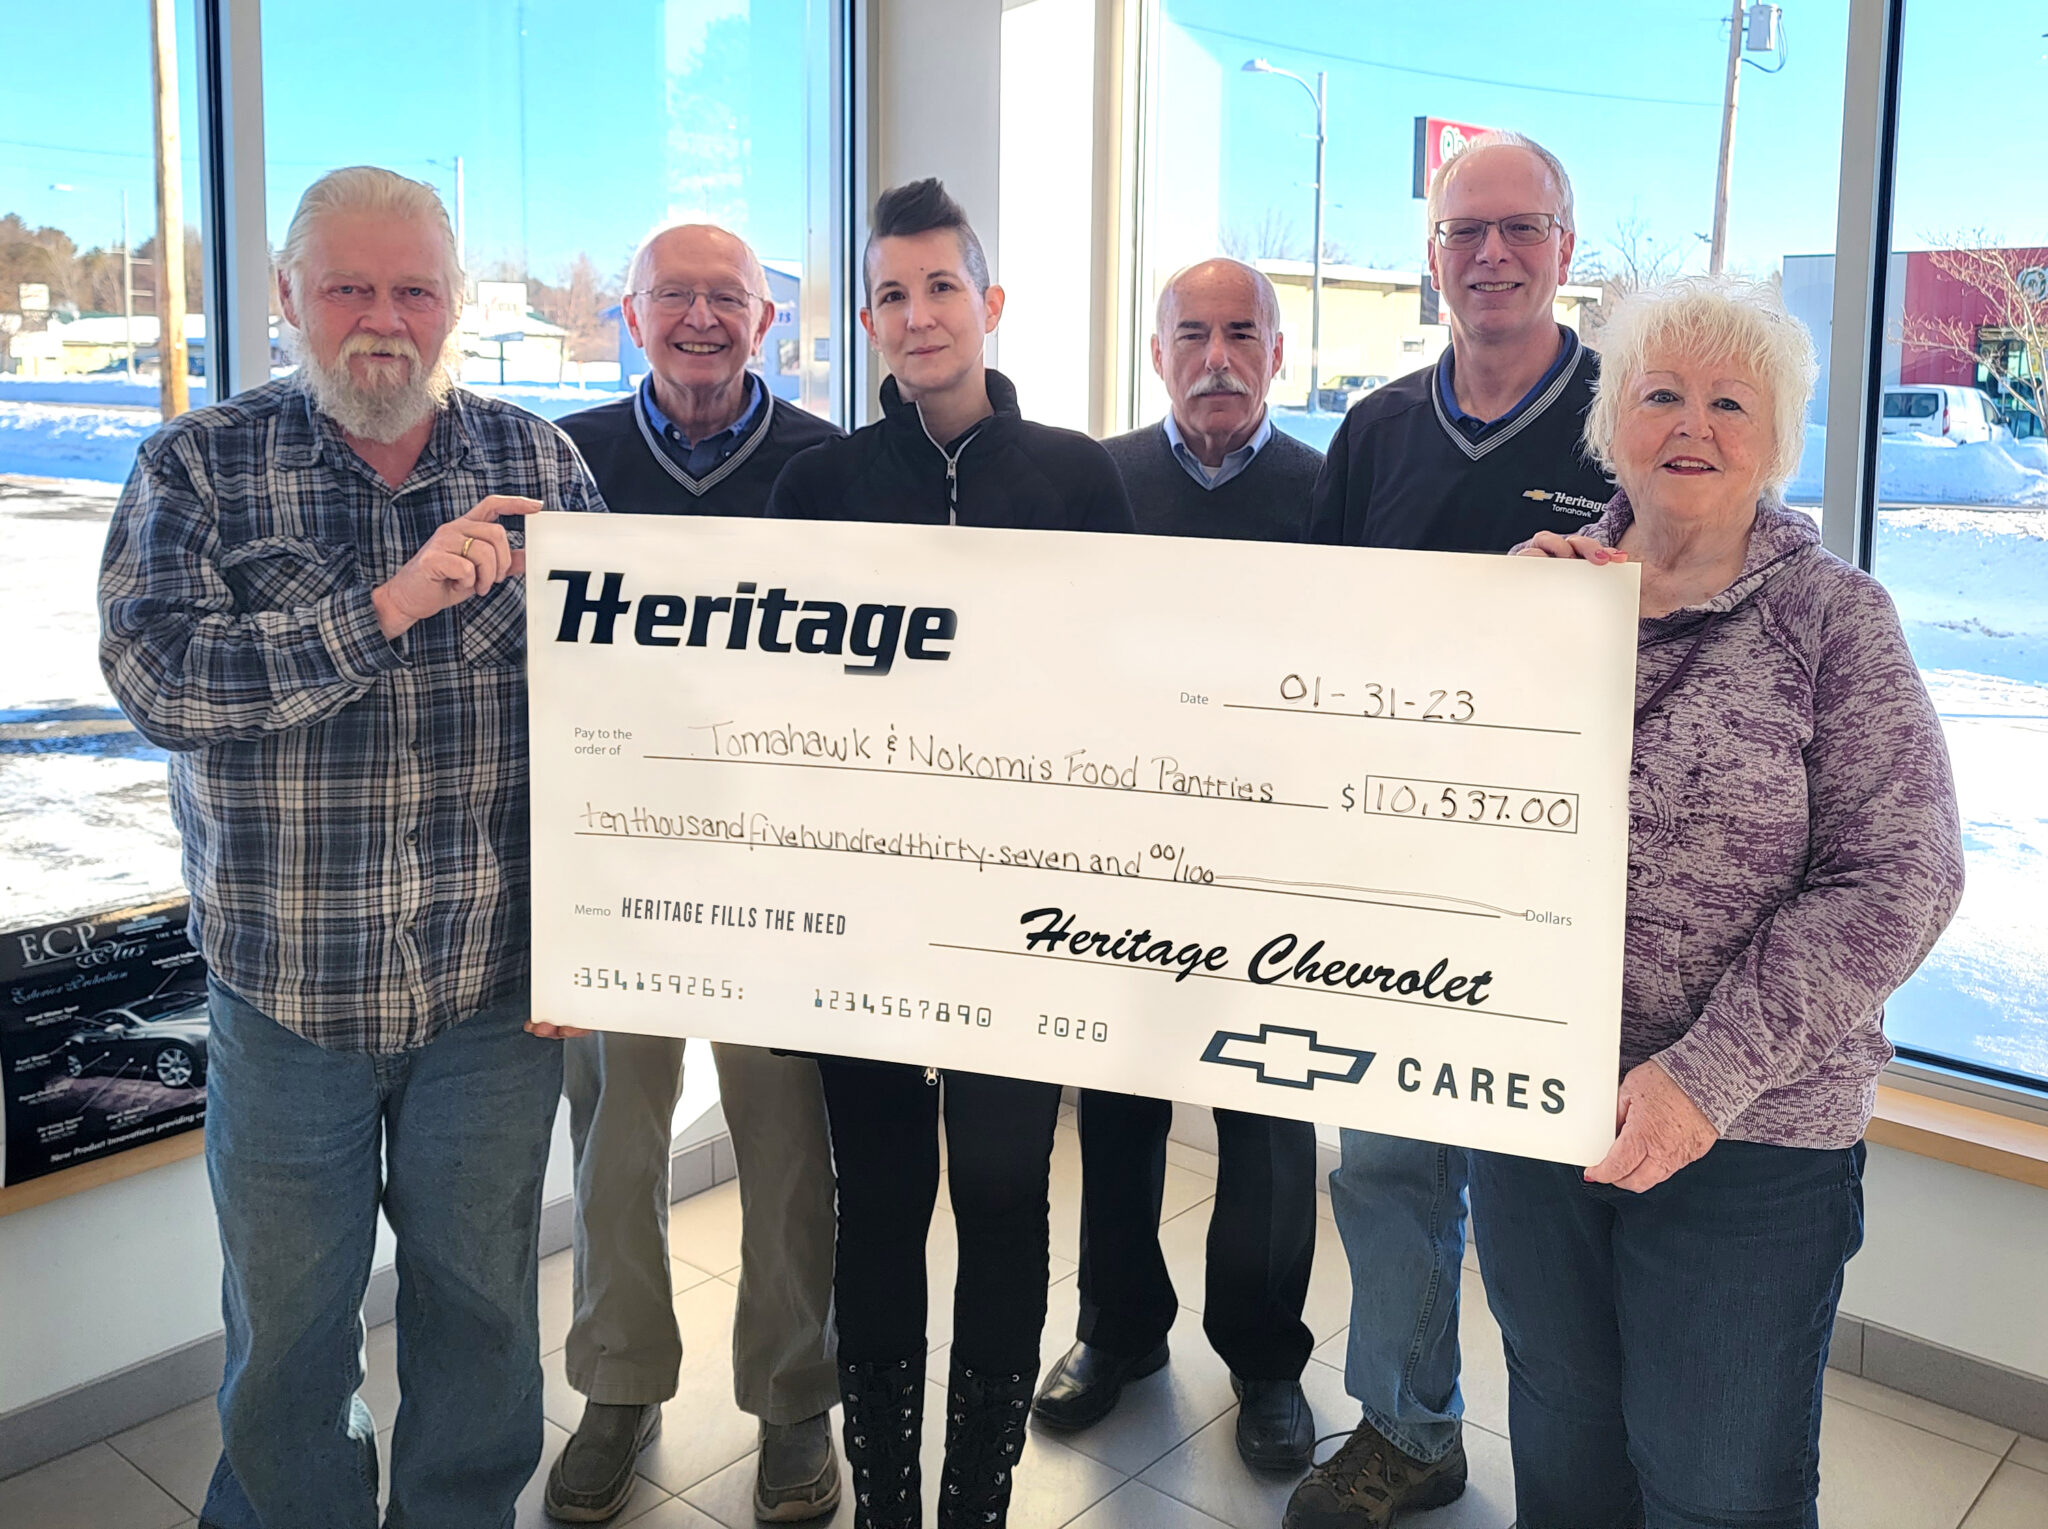 Heritage Chevrolet’s ‘Fill the Need’ campaign raises $10,000.00 for Tomahawk, Nokomis food pantries